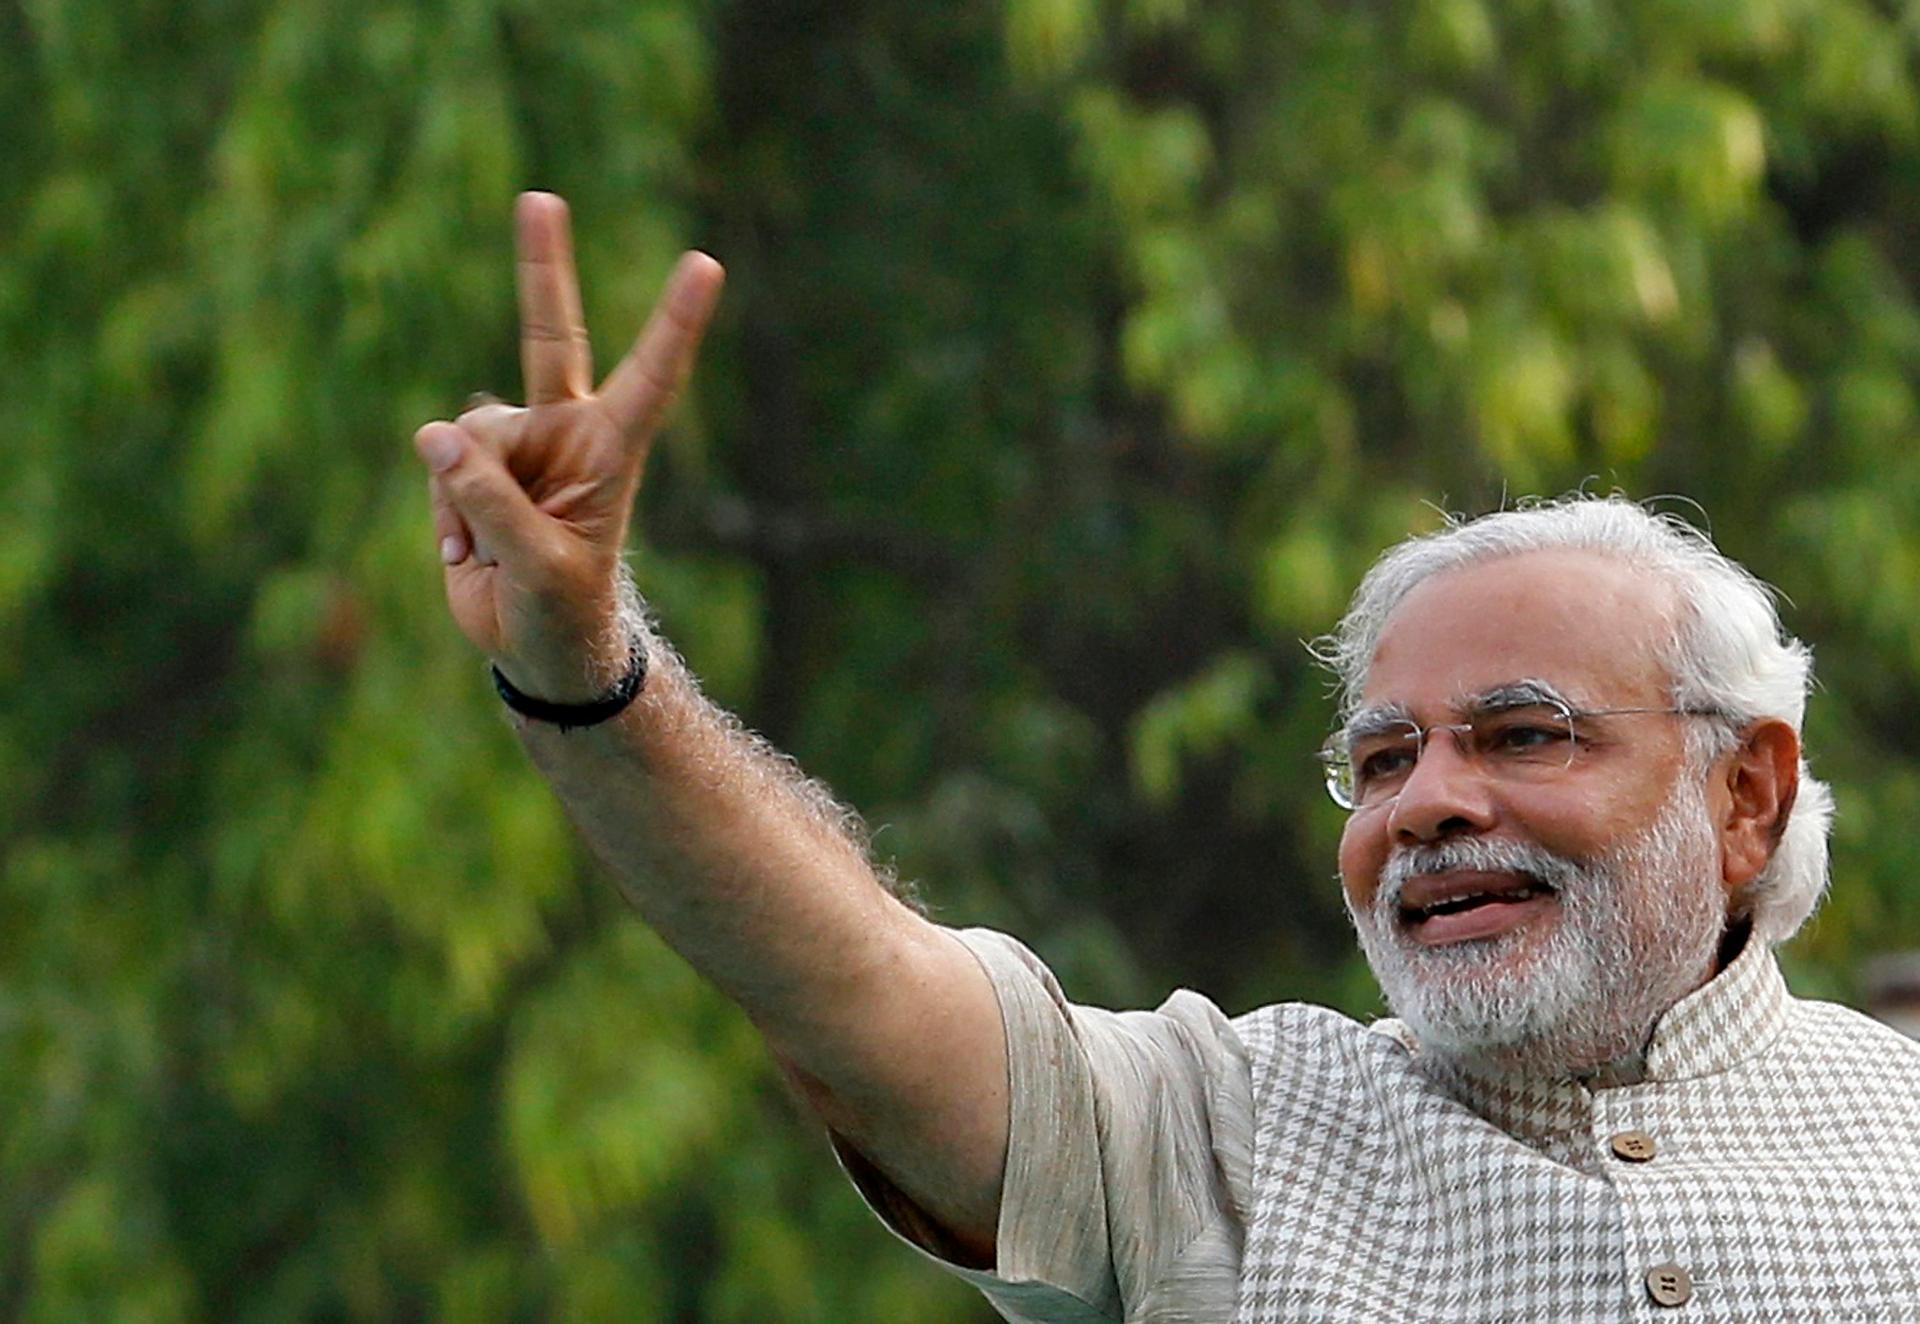 Narendra Modi gives a victory sign at a rally in his home state of Gujarat, Friday. Modi will be India's next Prime Minister after decisively winning parliamentary elections.